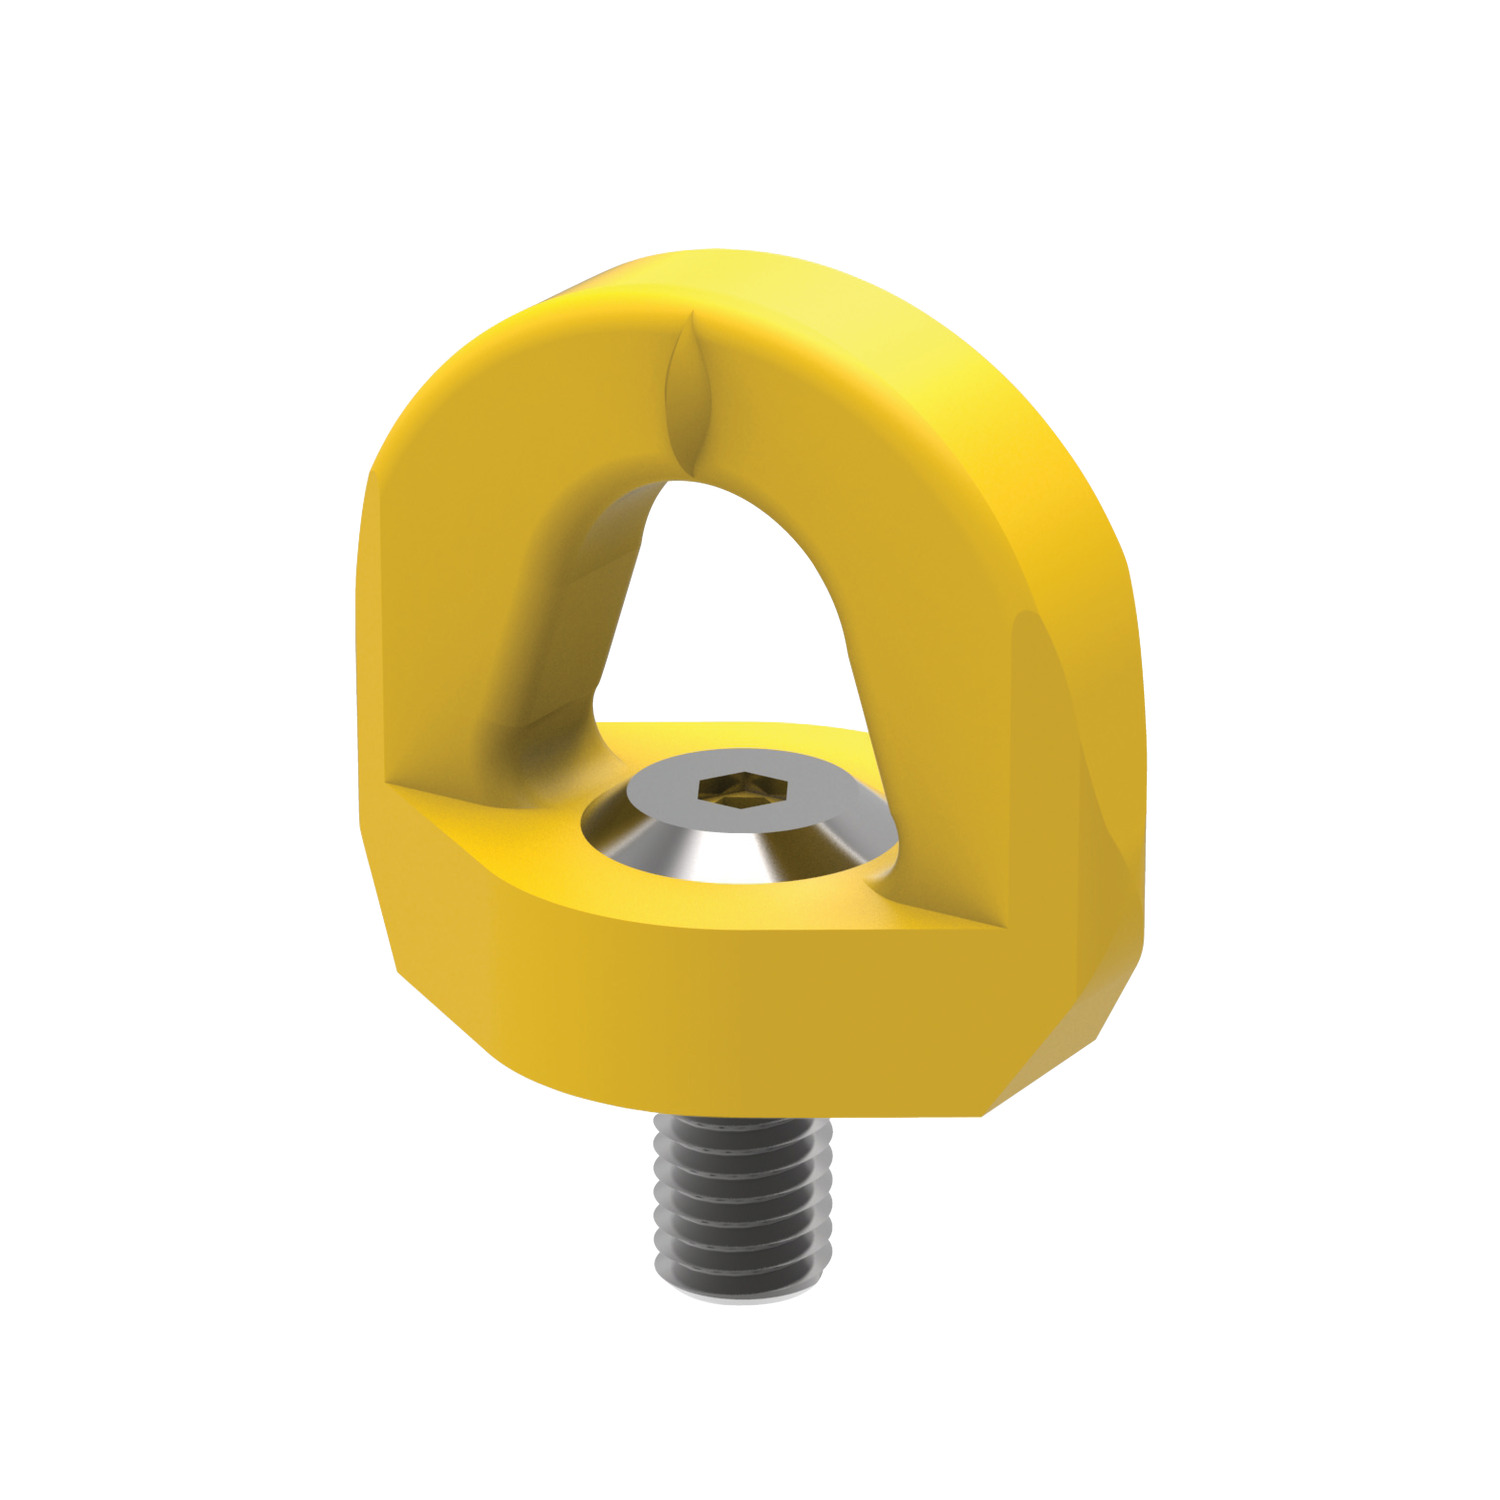 Fall Arrest Swivel Rings For use by harnessed personnel when conducting maintenance. Made from corrosion resistant, high tensile steel with coarse thread. Single articulation of full 360°.